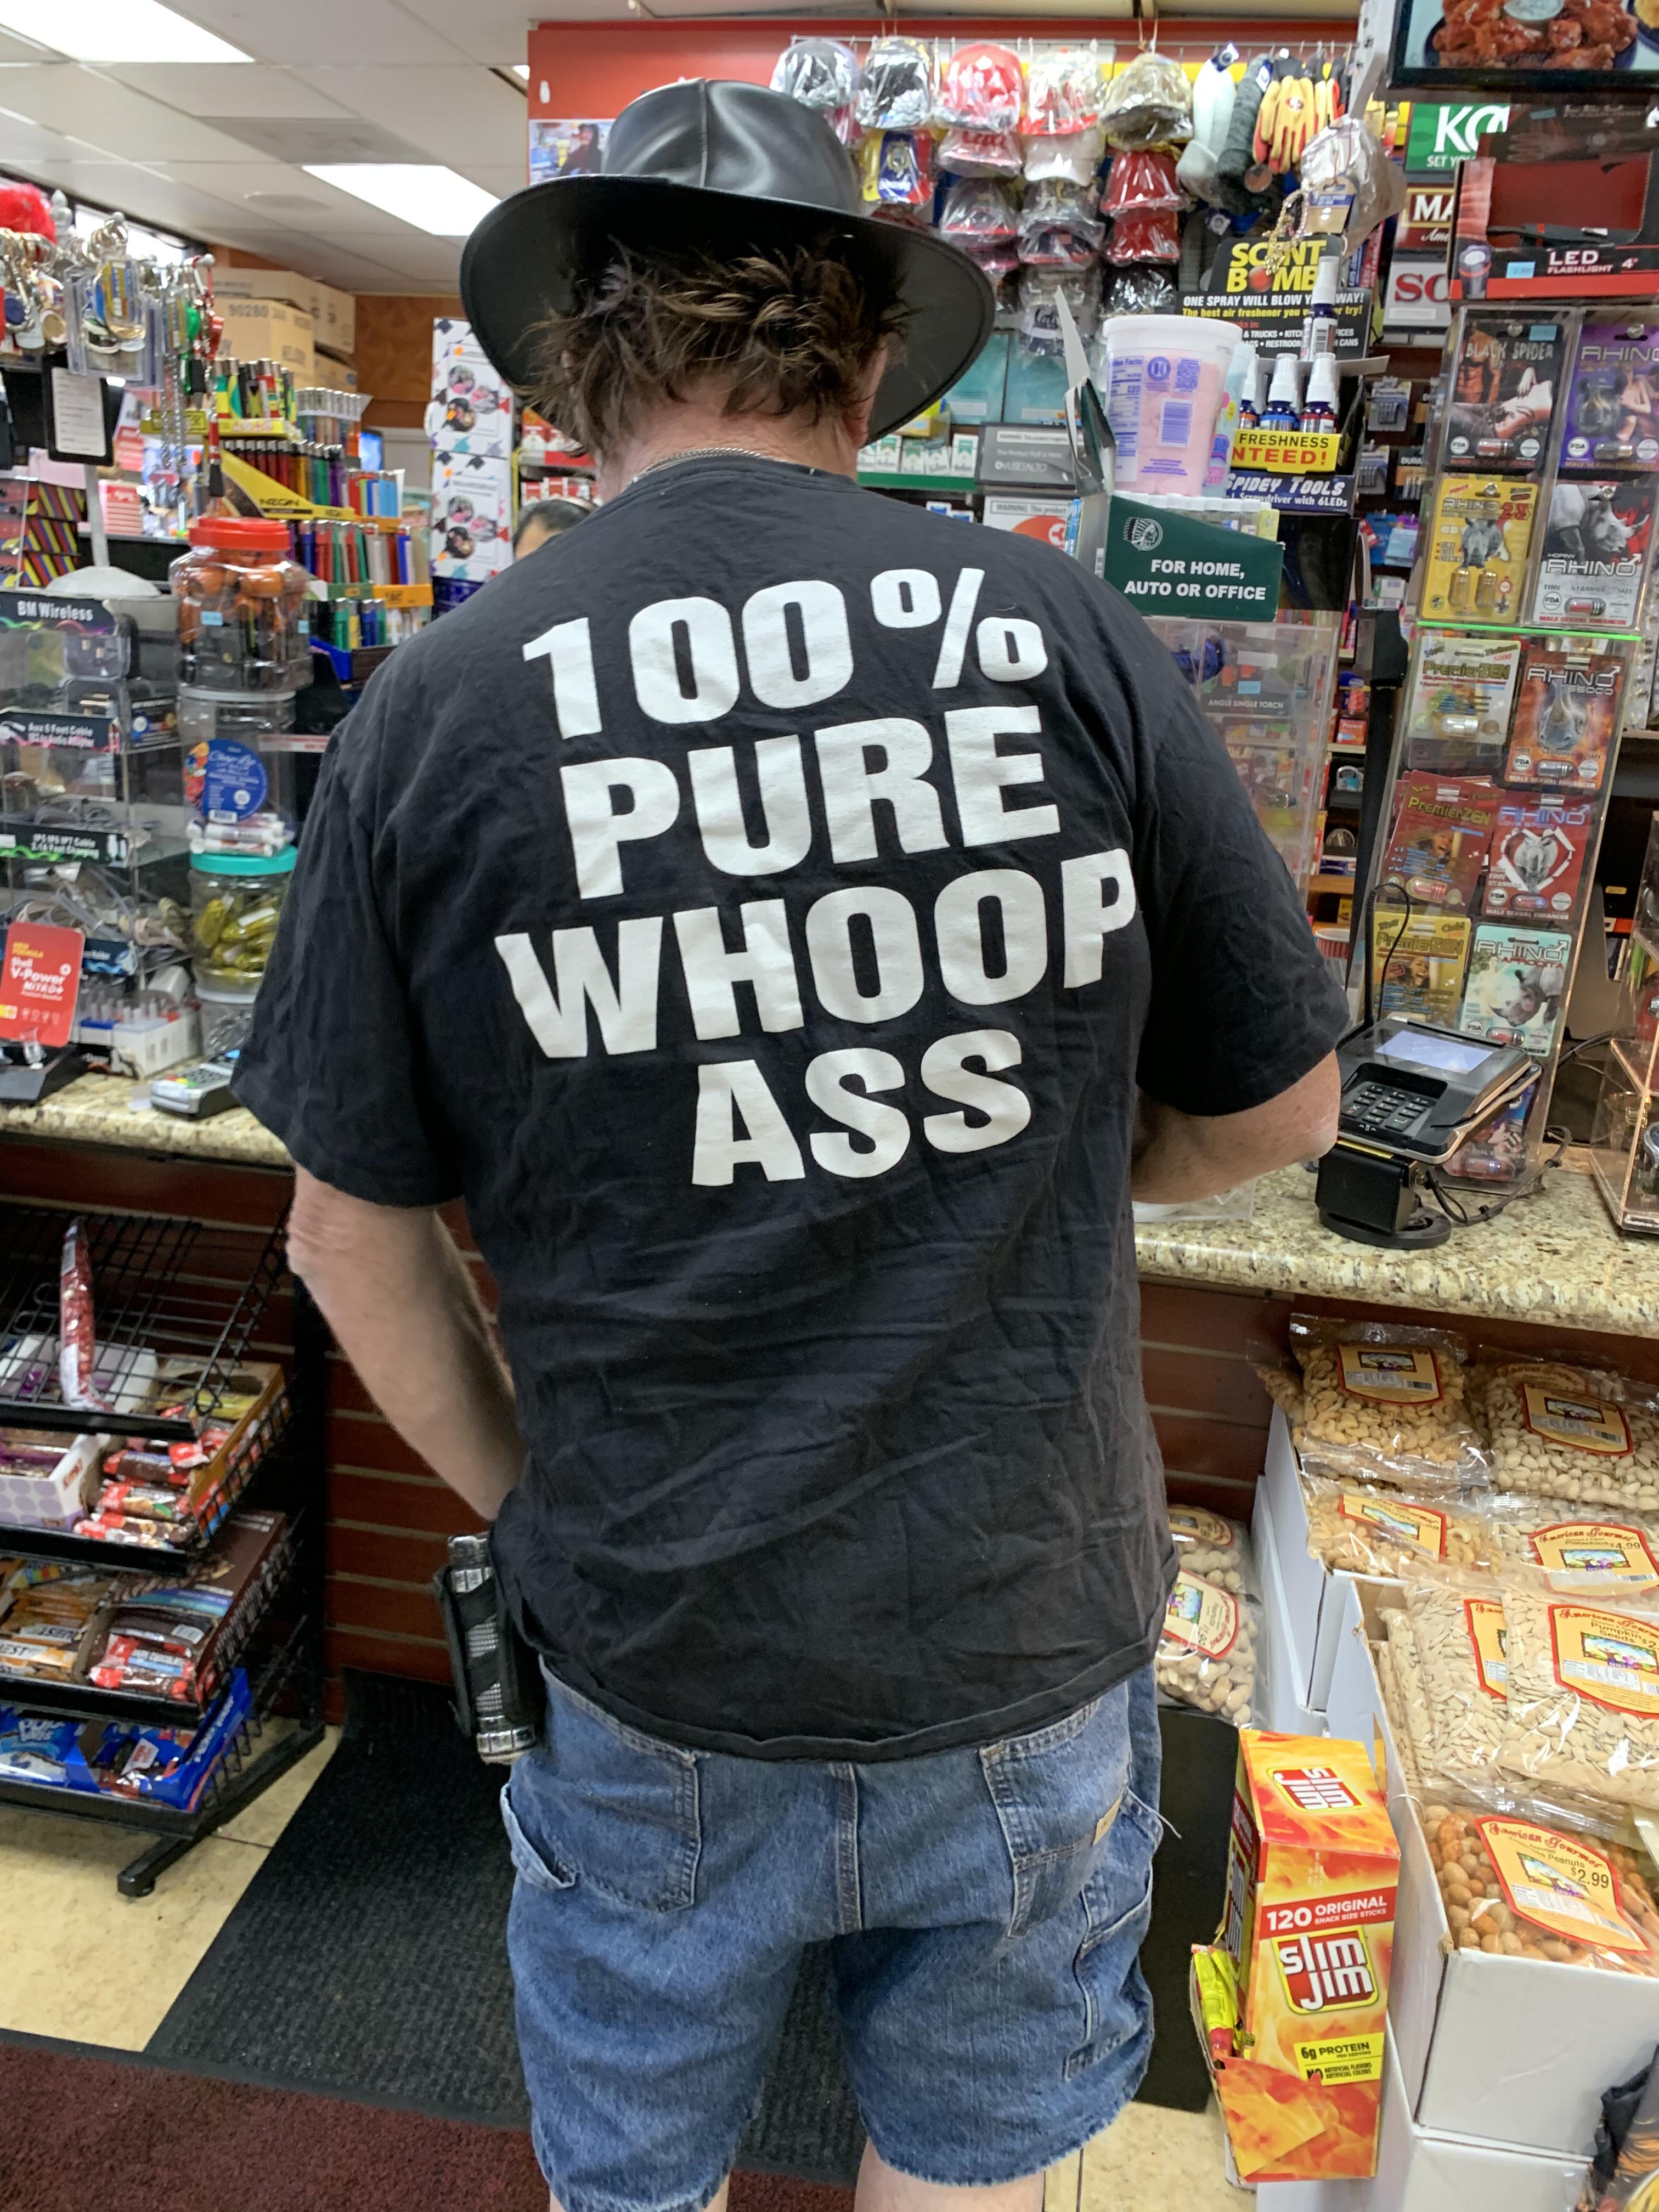 supermarket - 100% Pure Whoop Ass